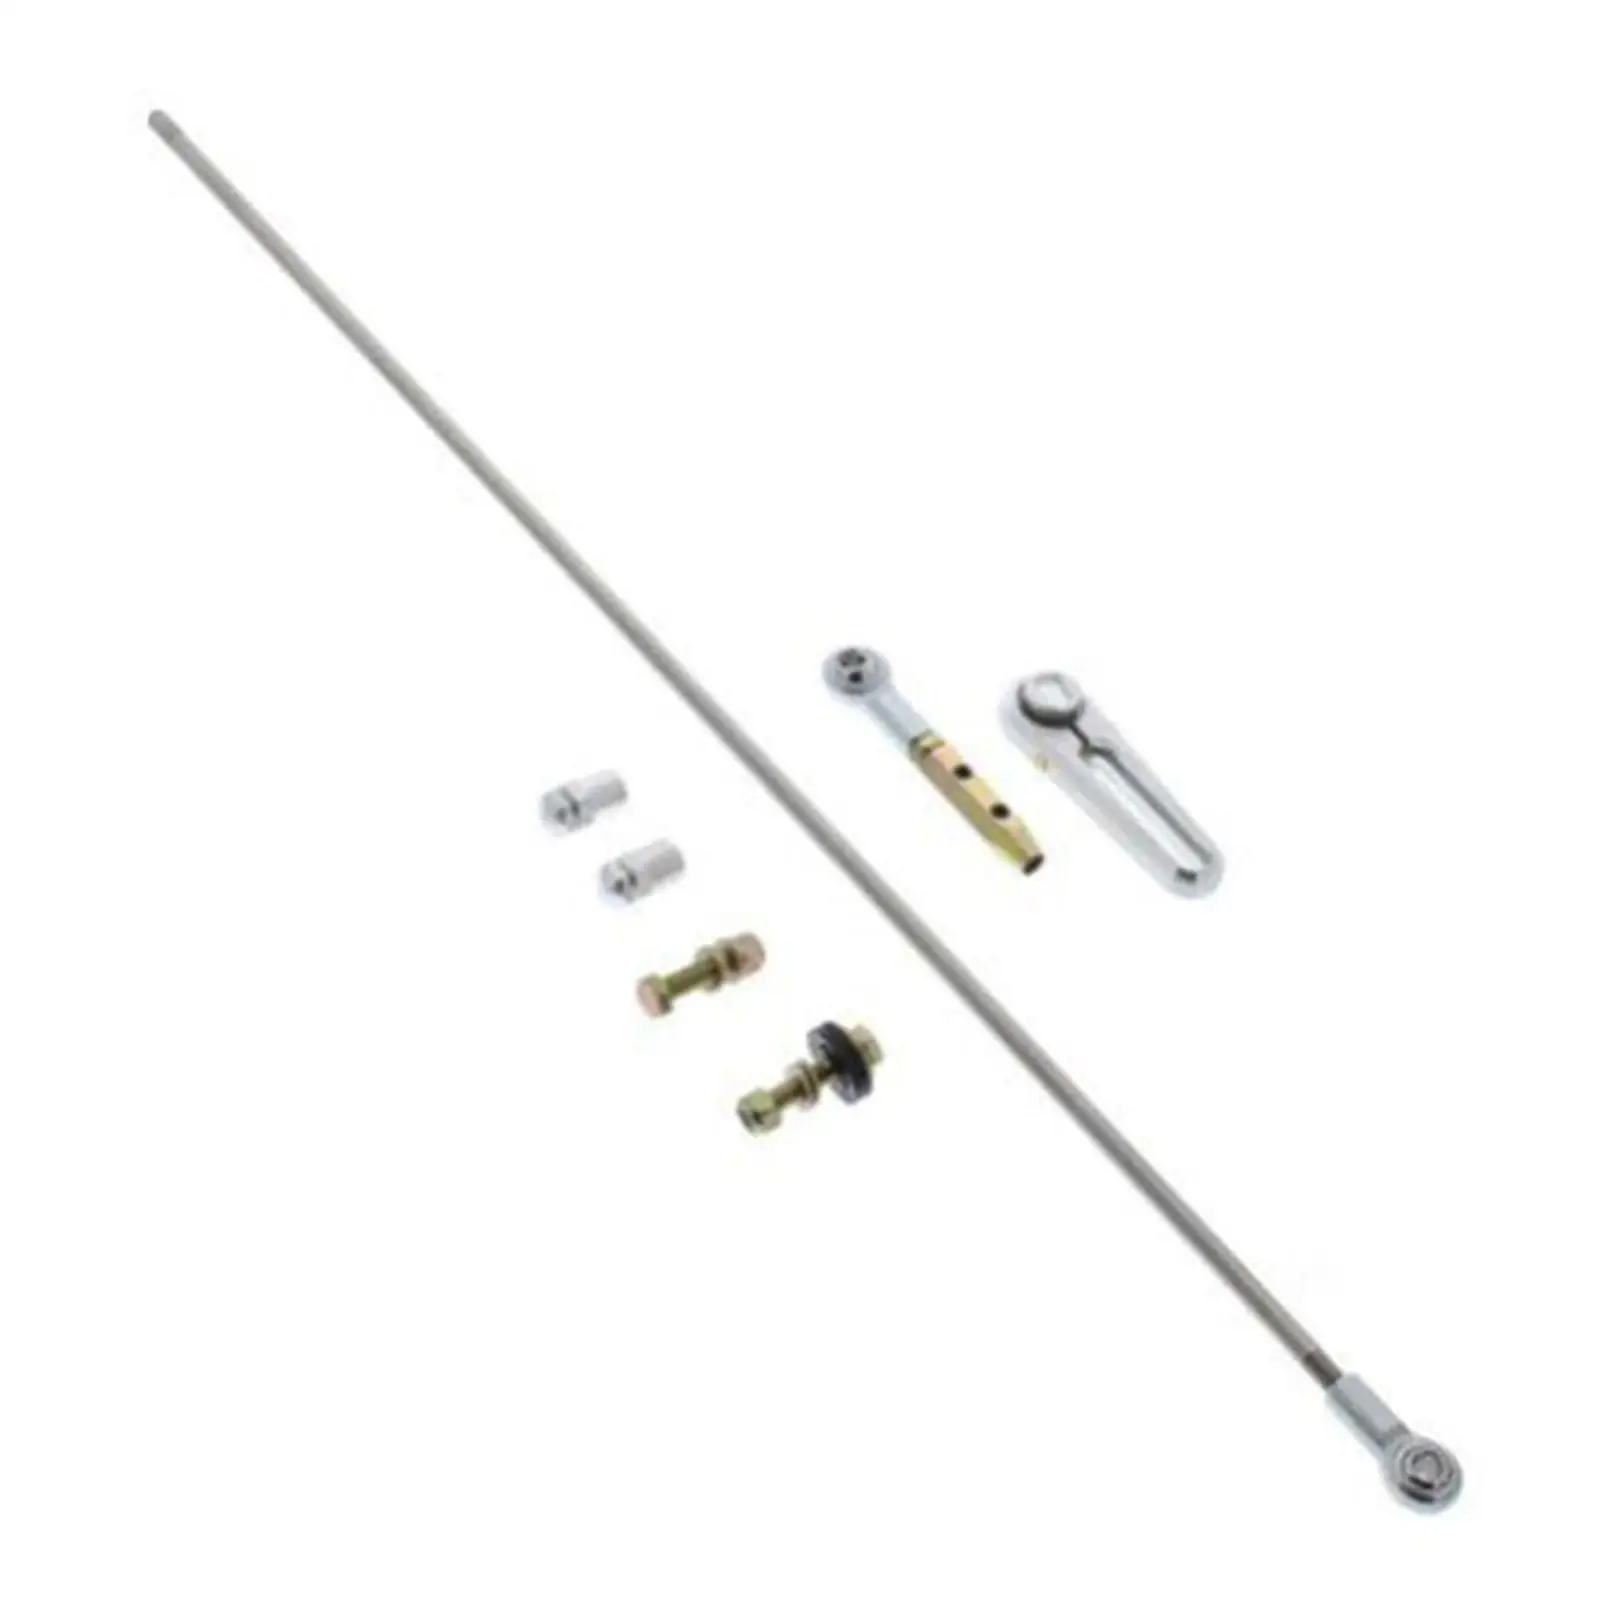 Transmission Shift Linkage Kit Premium Replacement for GM 700R4 4L60